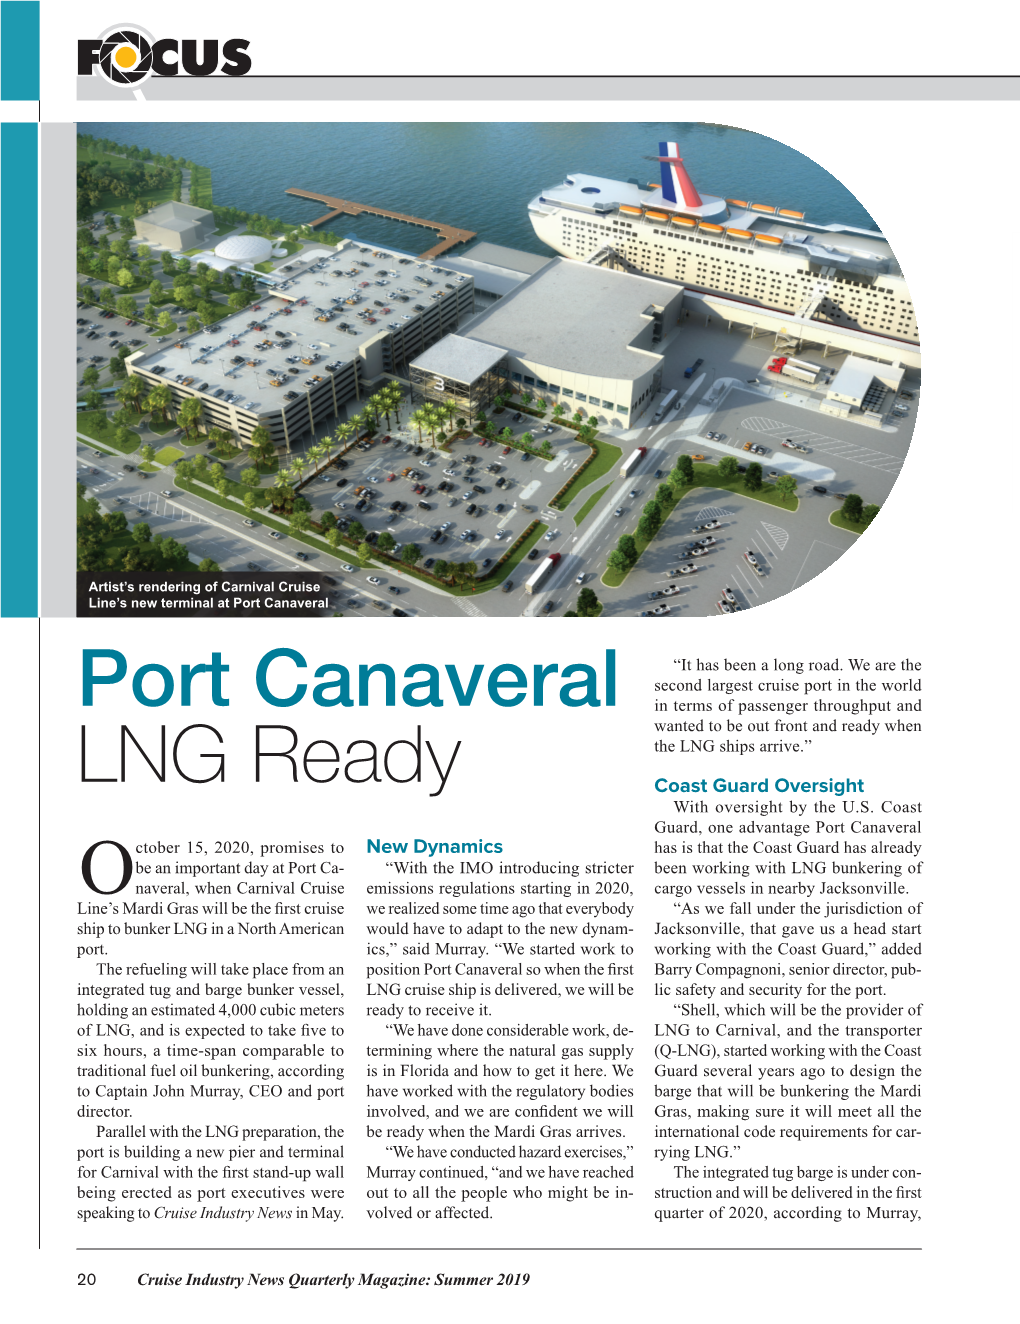 Port Canaveral LNG Ready